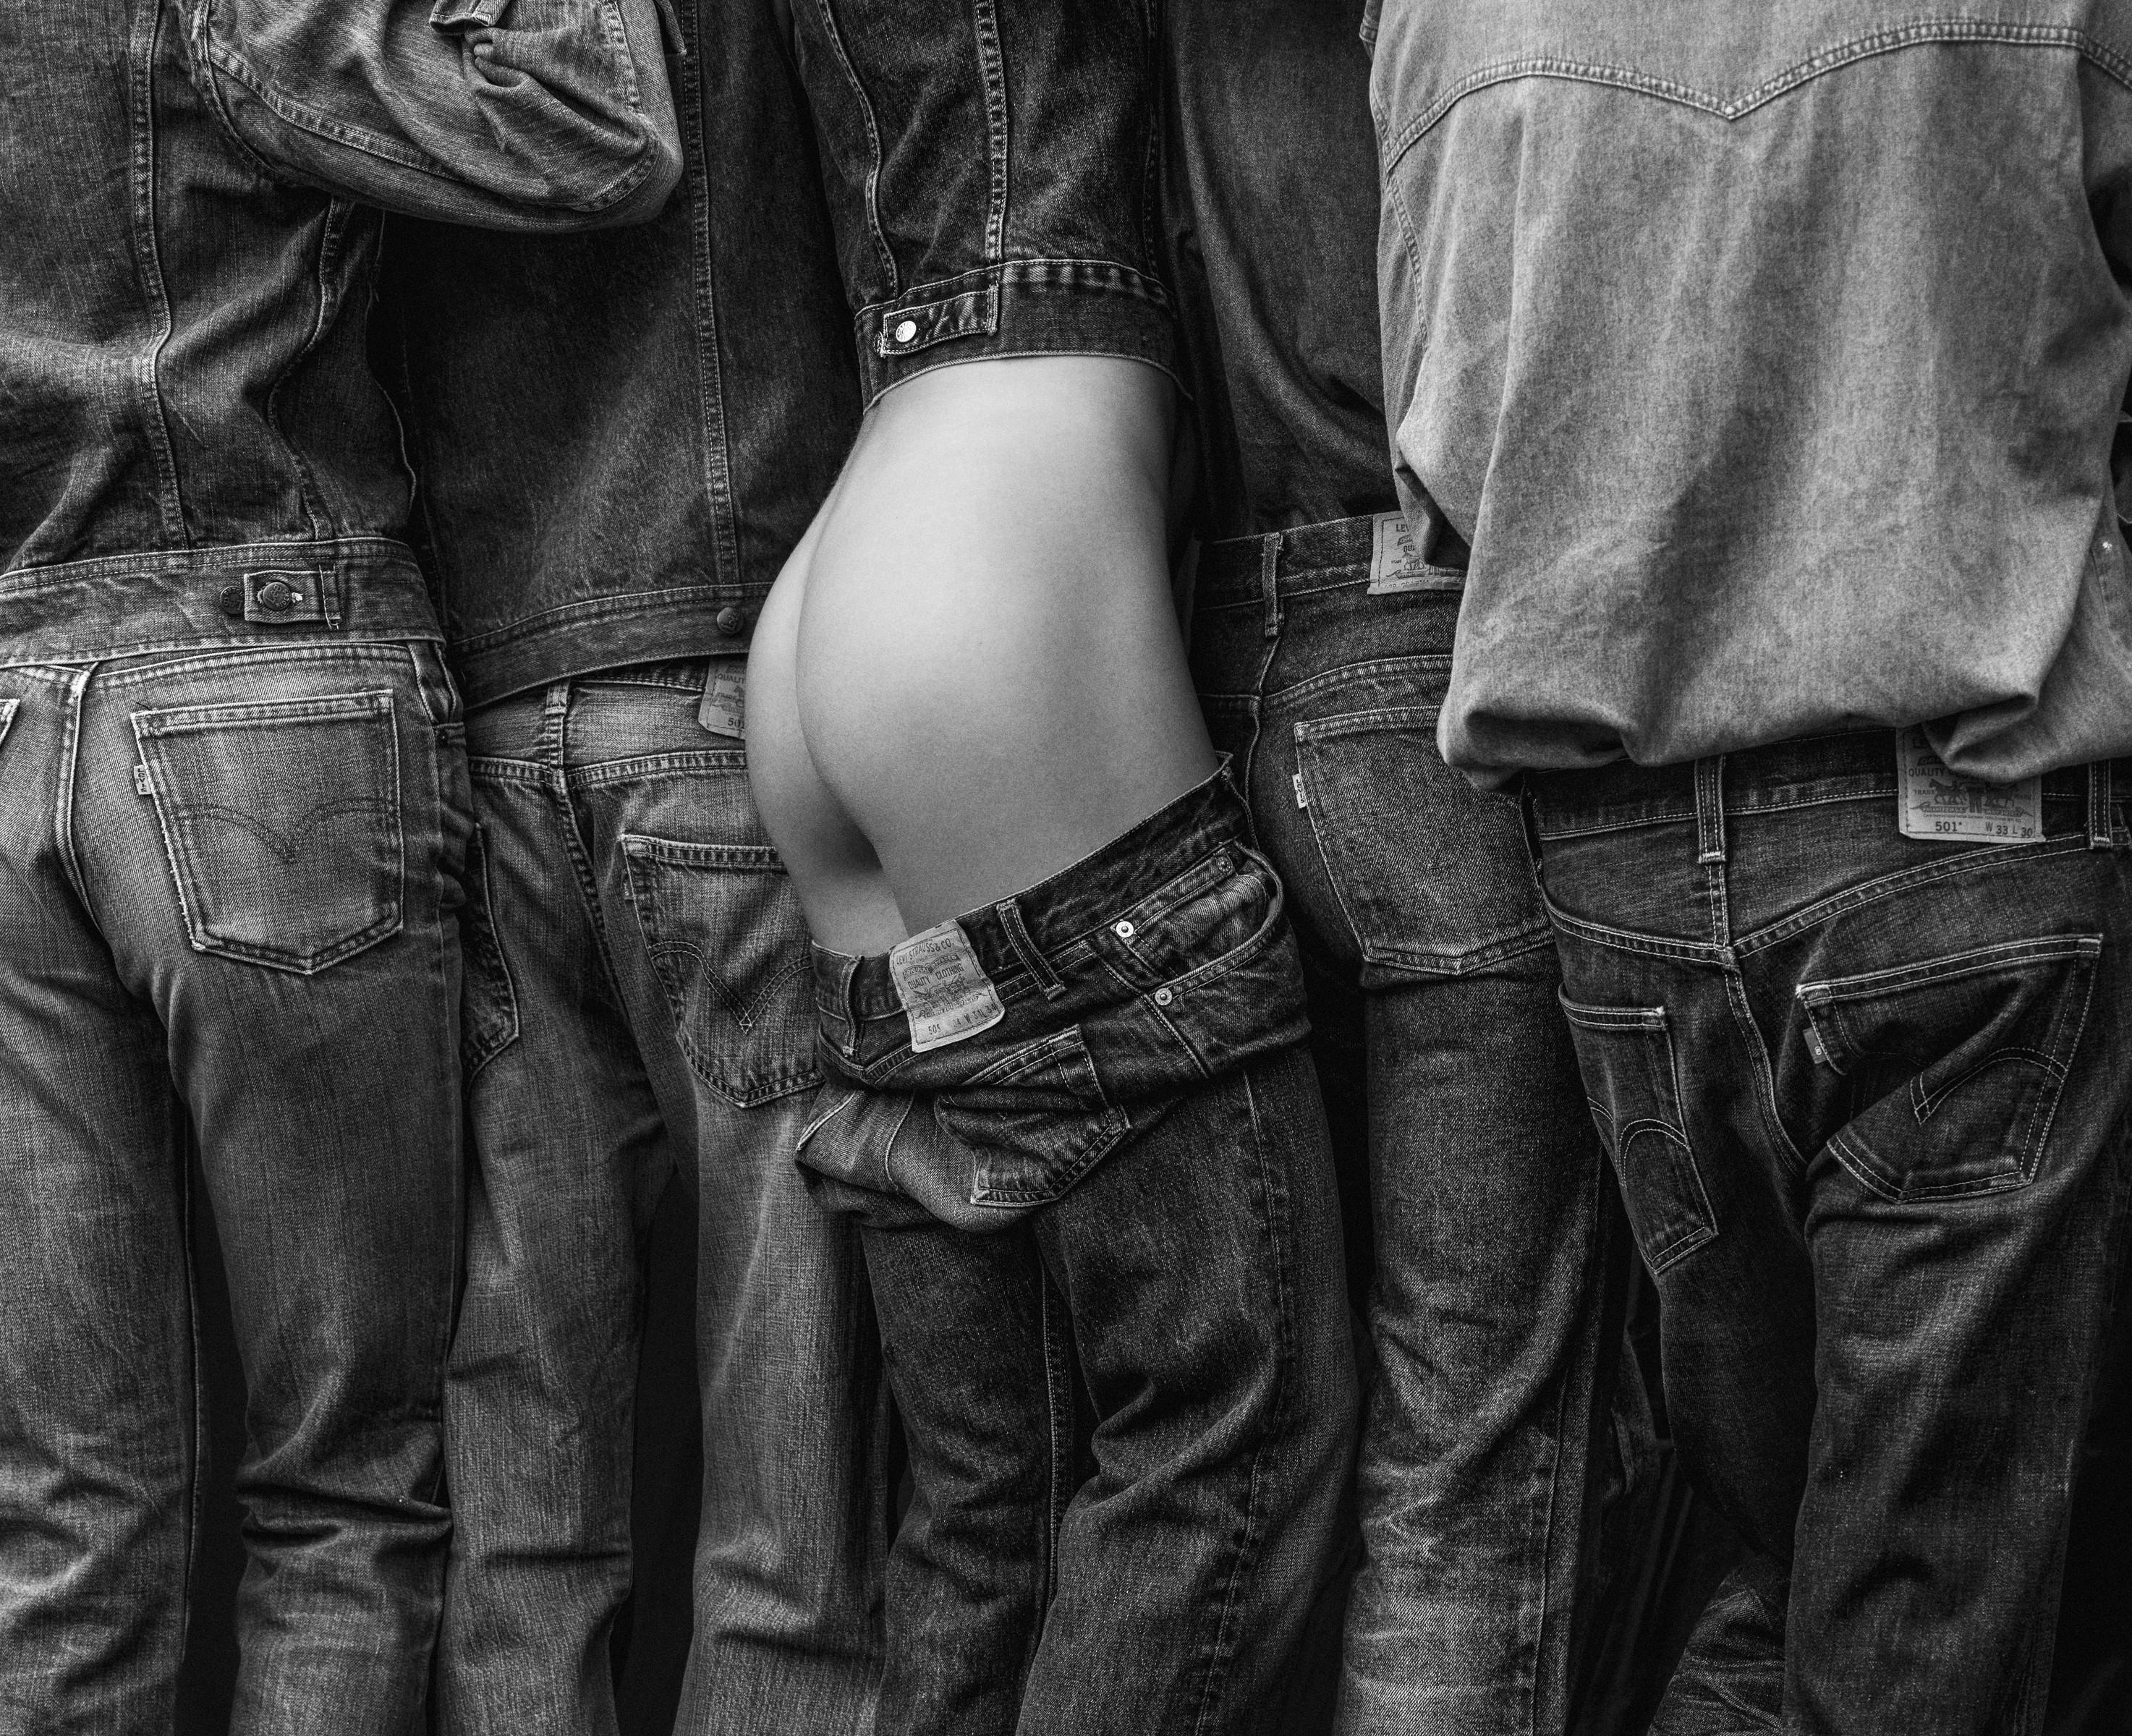 "Boyfriends Jeans" Photography 24" x 32" inch Edition 2/7 by Lukas Dvorak 

24" x 32" inch 
Pigment print on Epson Fine ART paper
2019

Ships rolled in a tube 

ABOUT THE ARTIST
Lukas Dvorak is a Czech photographer born in Prague in 1982. His